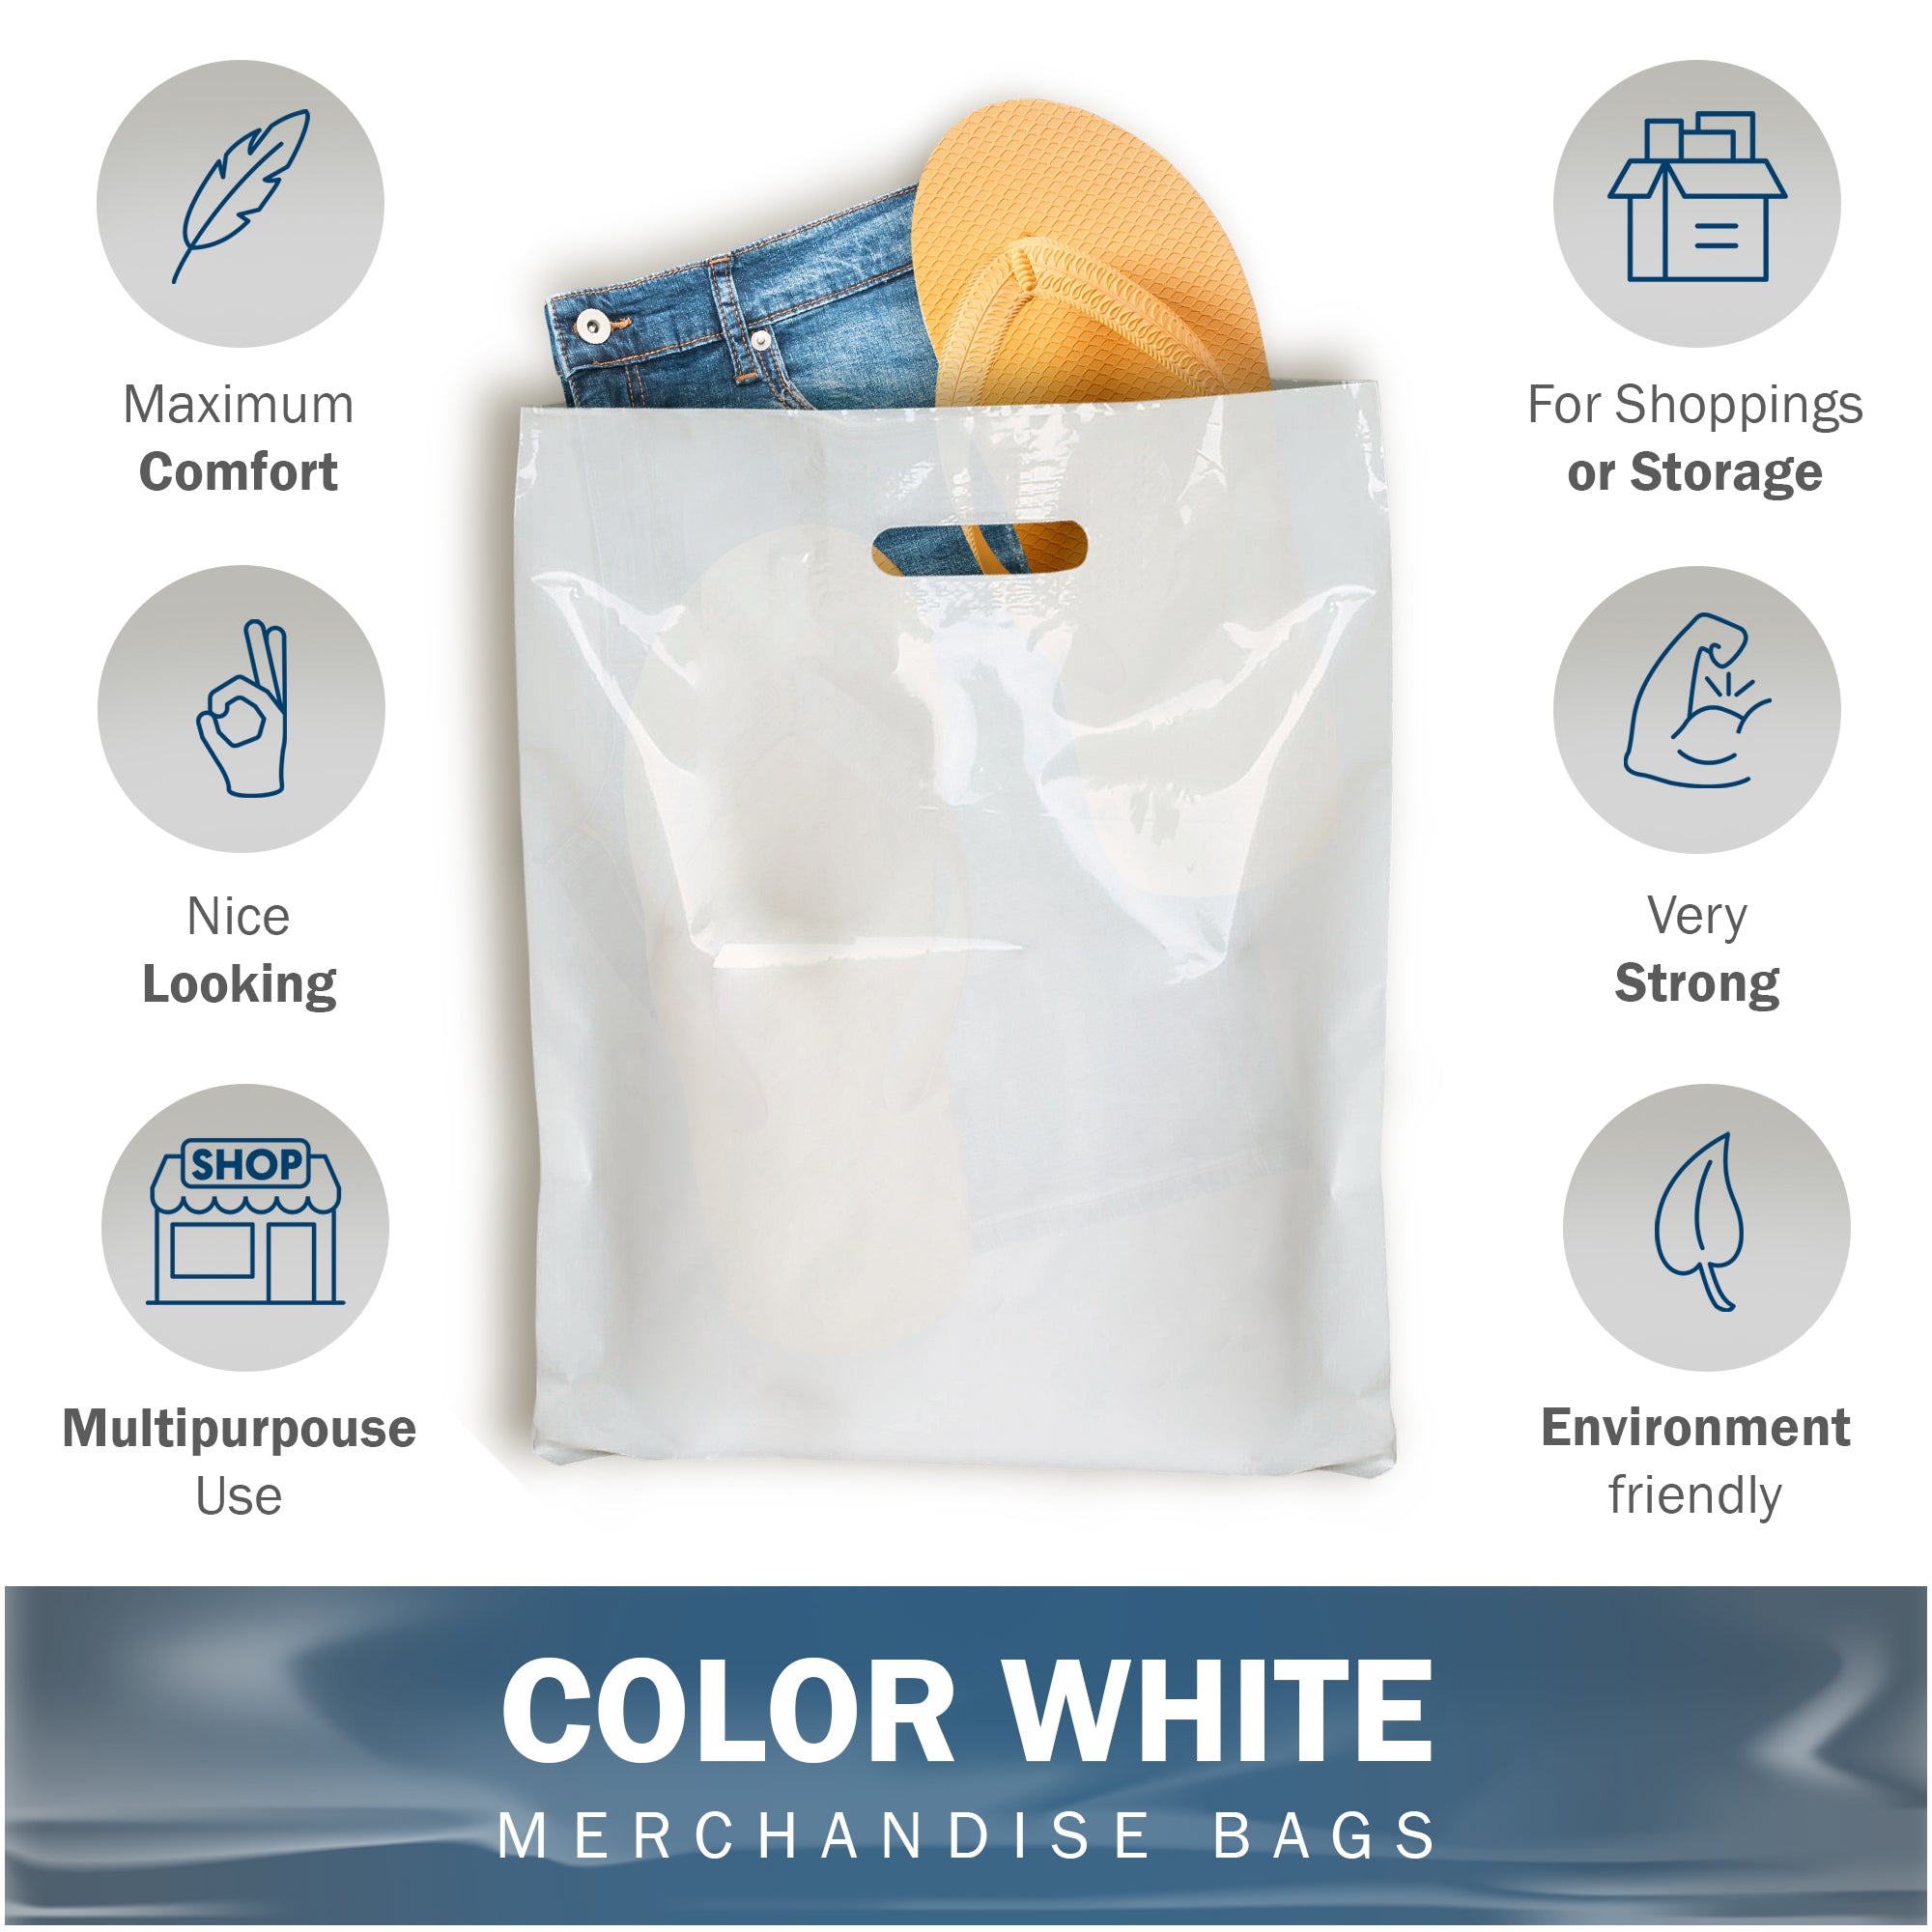 White Merchandise Plastic Shopping Bags - 100 Pack 12 x 15with 1.25 Mil Thick | Die